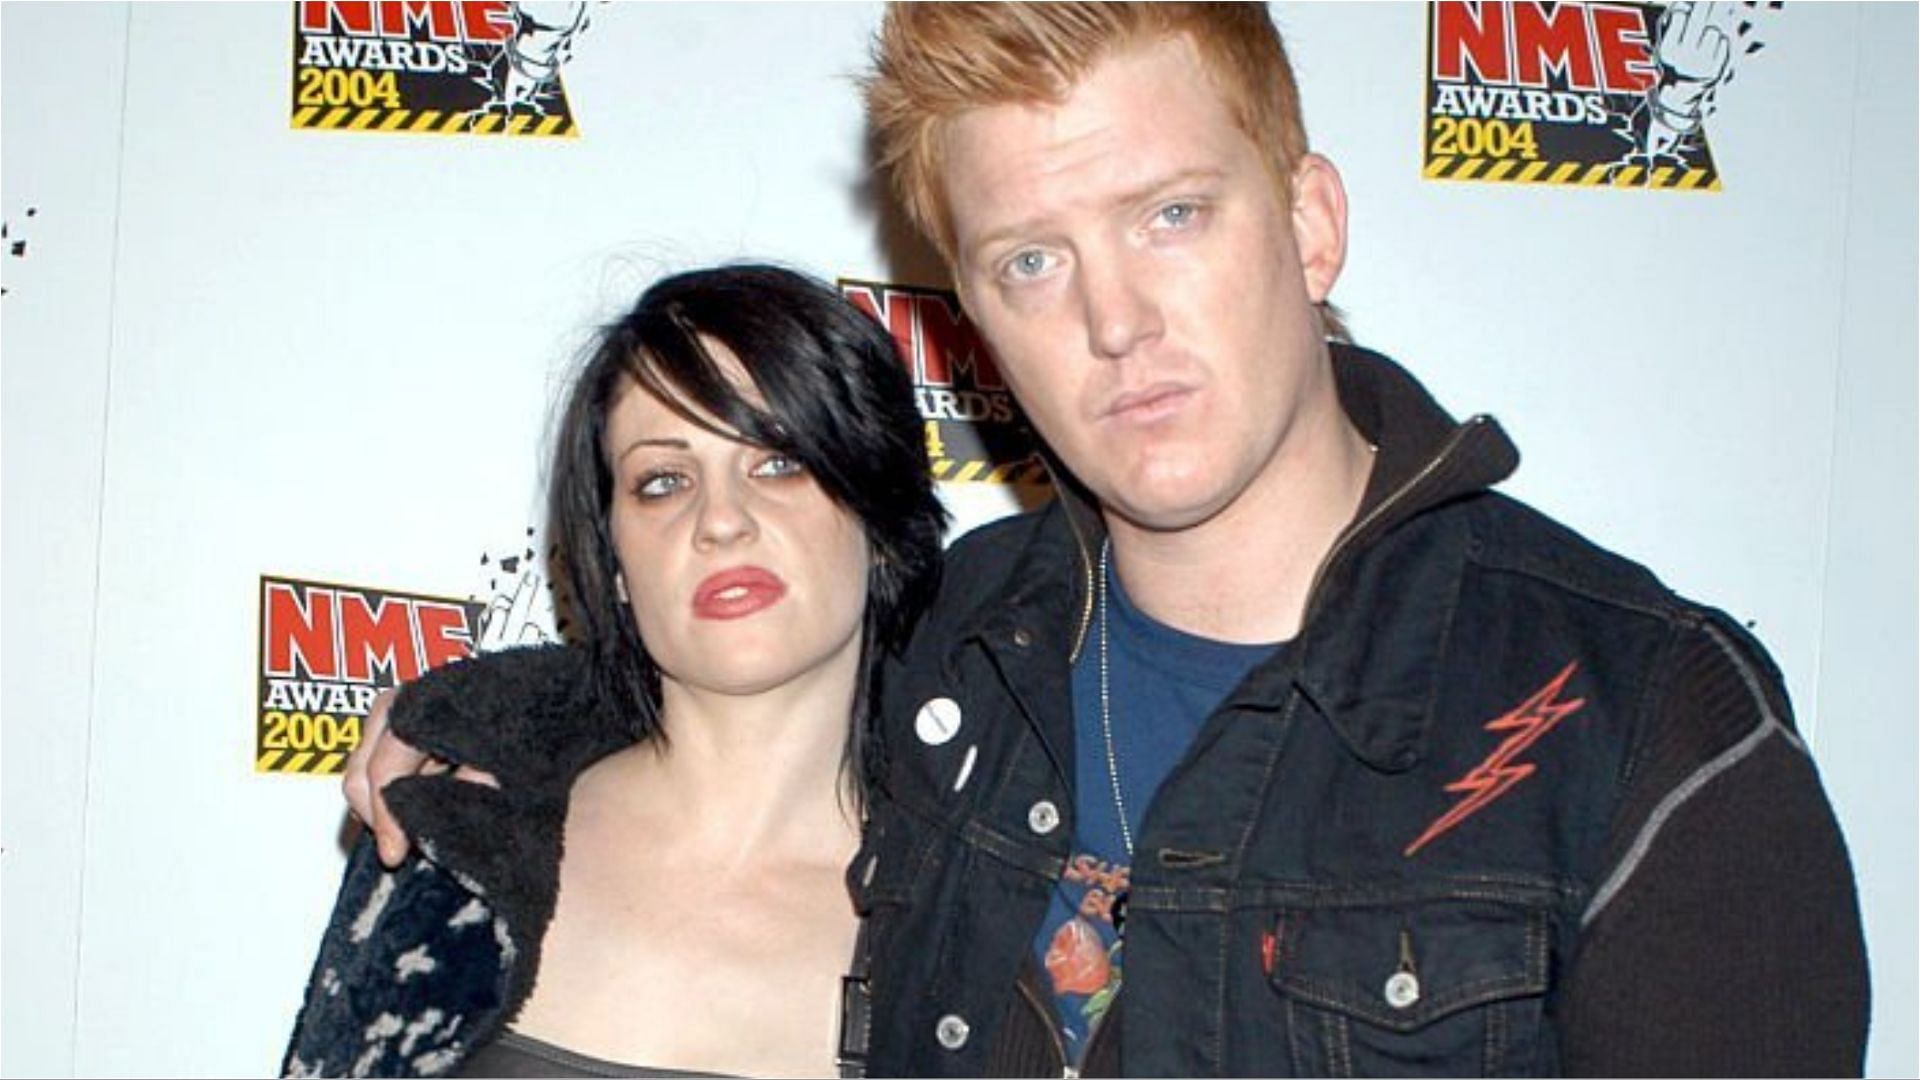 Josh Homme spoke about his custody battle with Brody Dalle (Image via Brian Rasic/Getty Images)